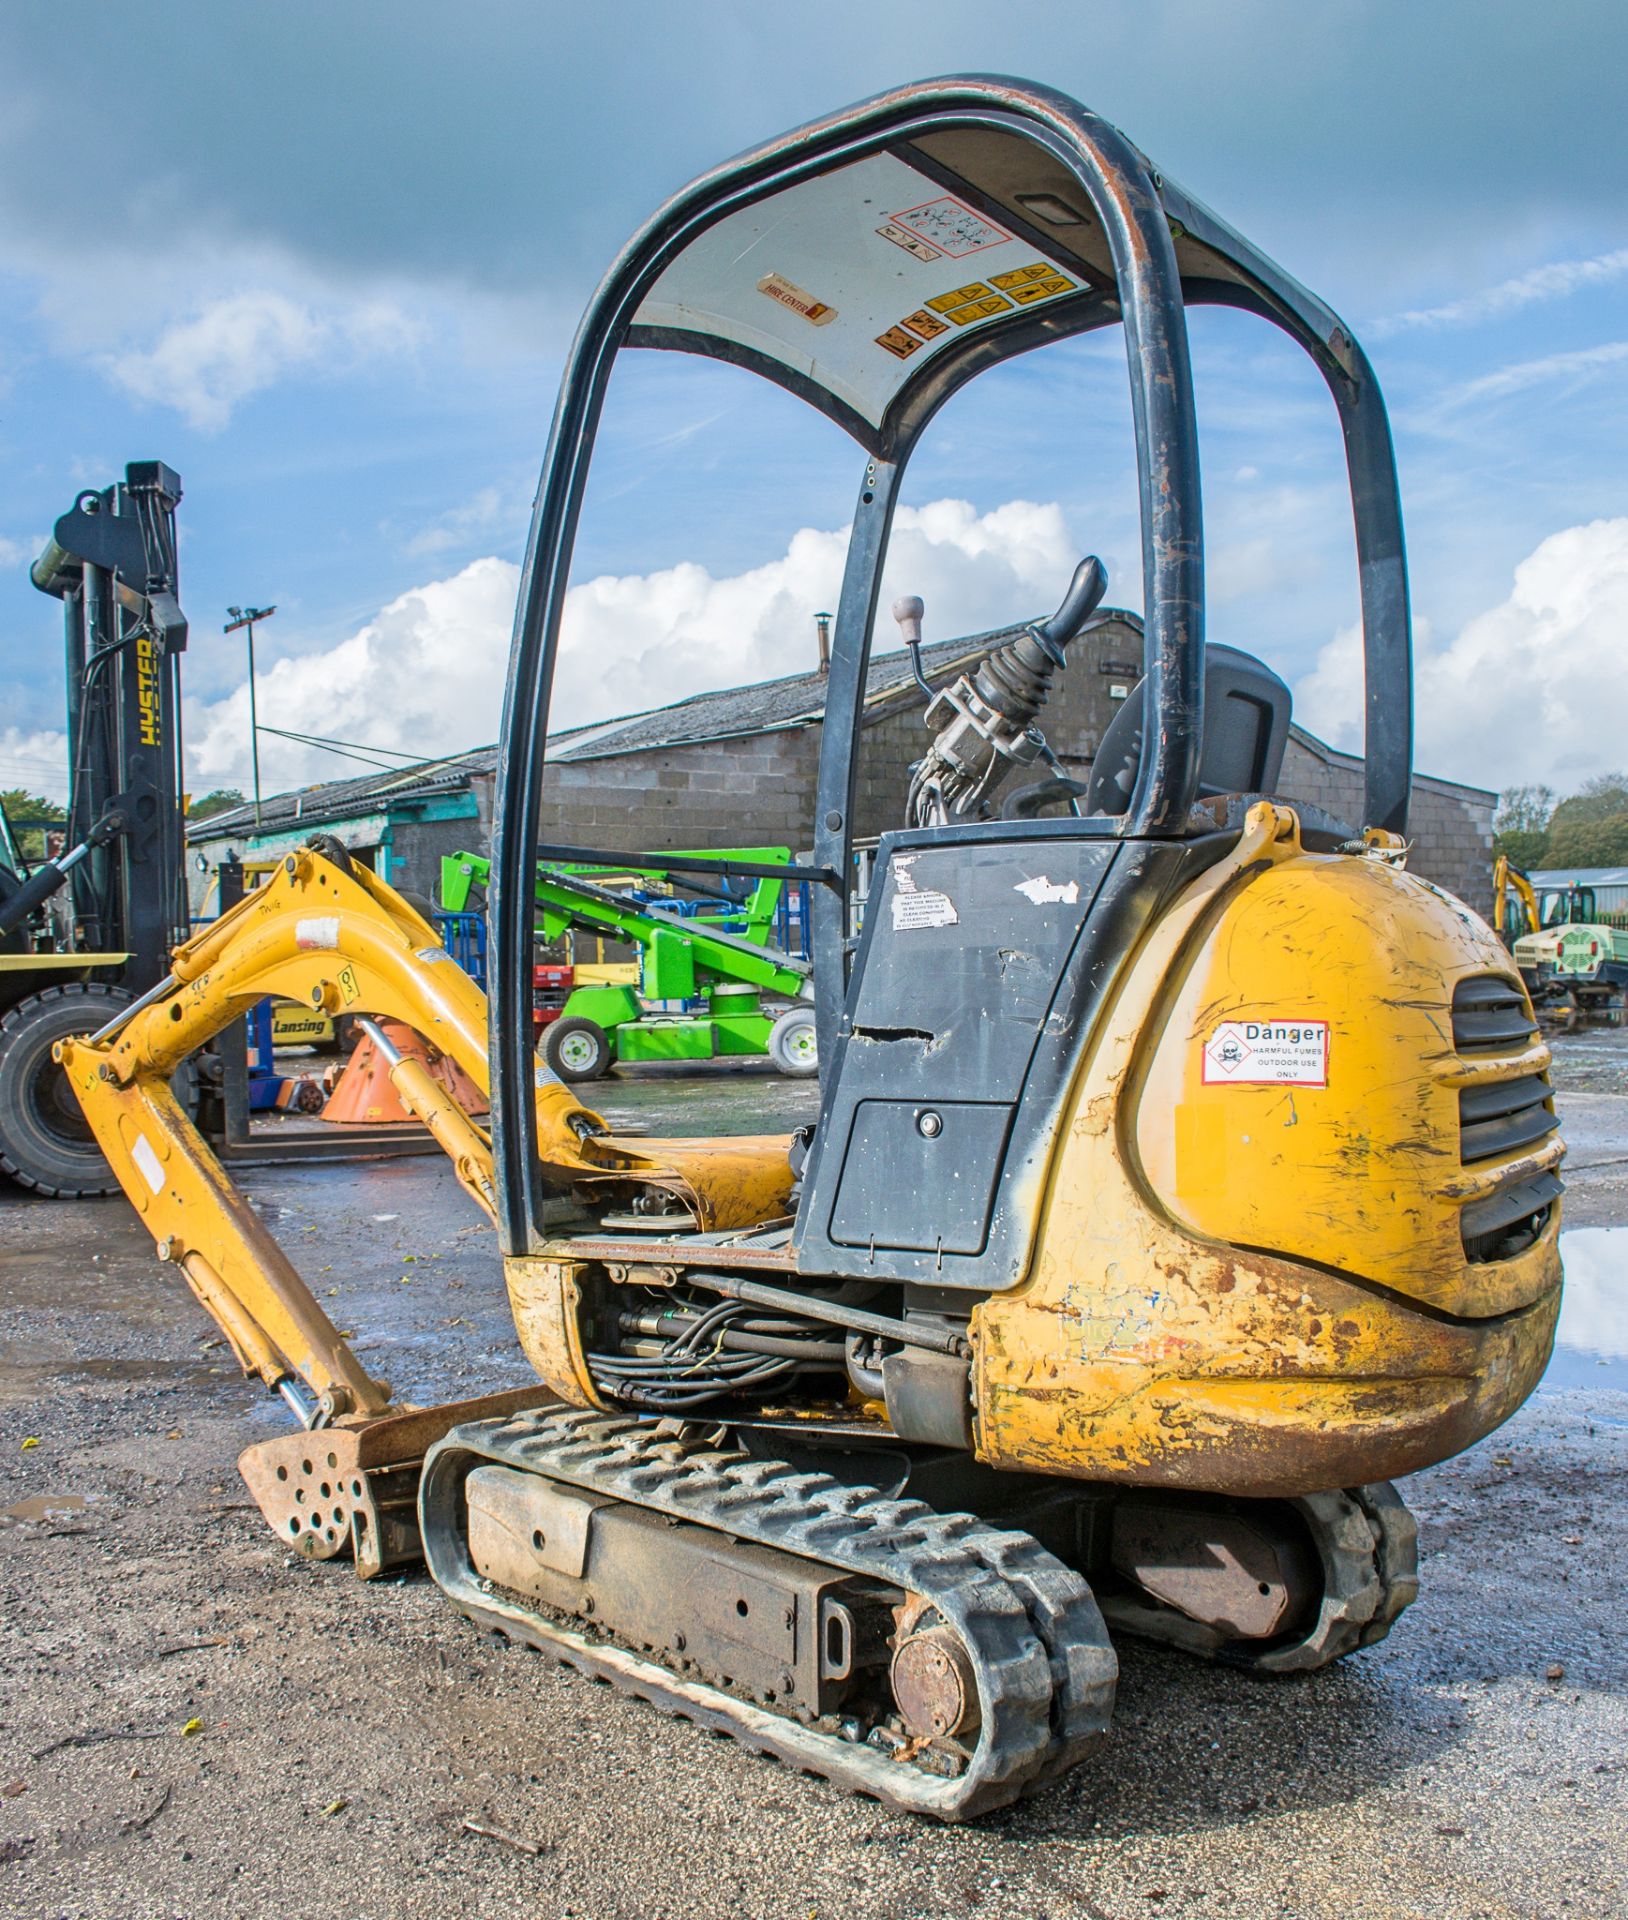 JCB 801.4 1.5 tonne rubber tracked excavator Year: 2006 S/N: 56717 blade, piped & 1 bucket ** Sold - Image 3 of 17